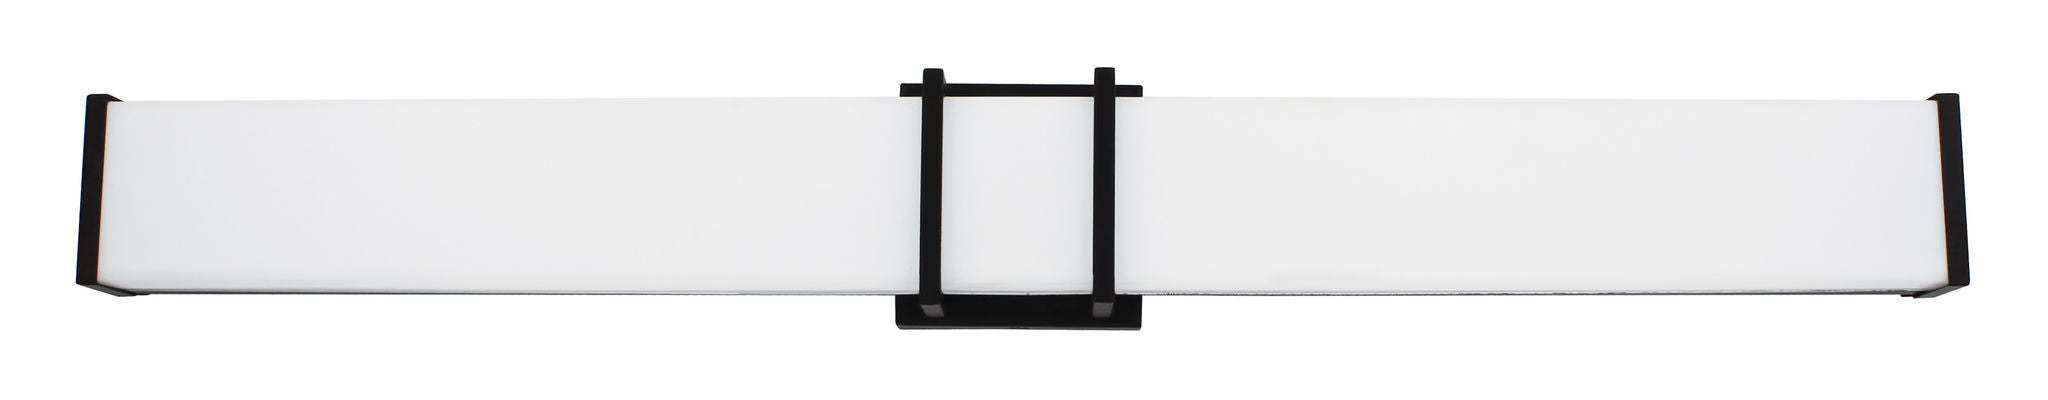 Tomero Sconce Black INTEGRATED LED - 204127A | EGLO